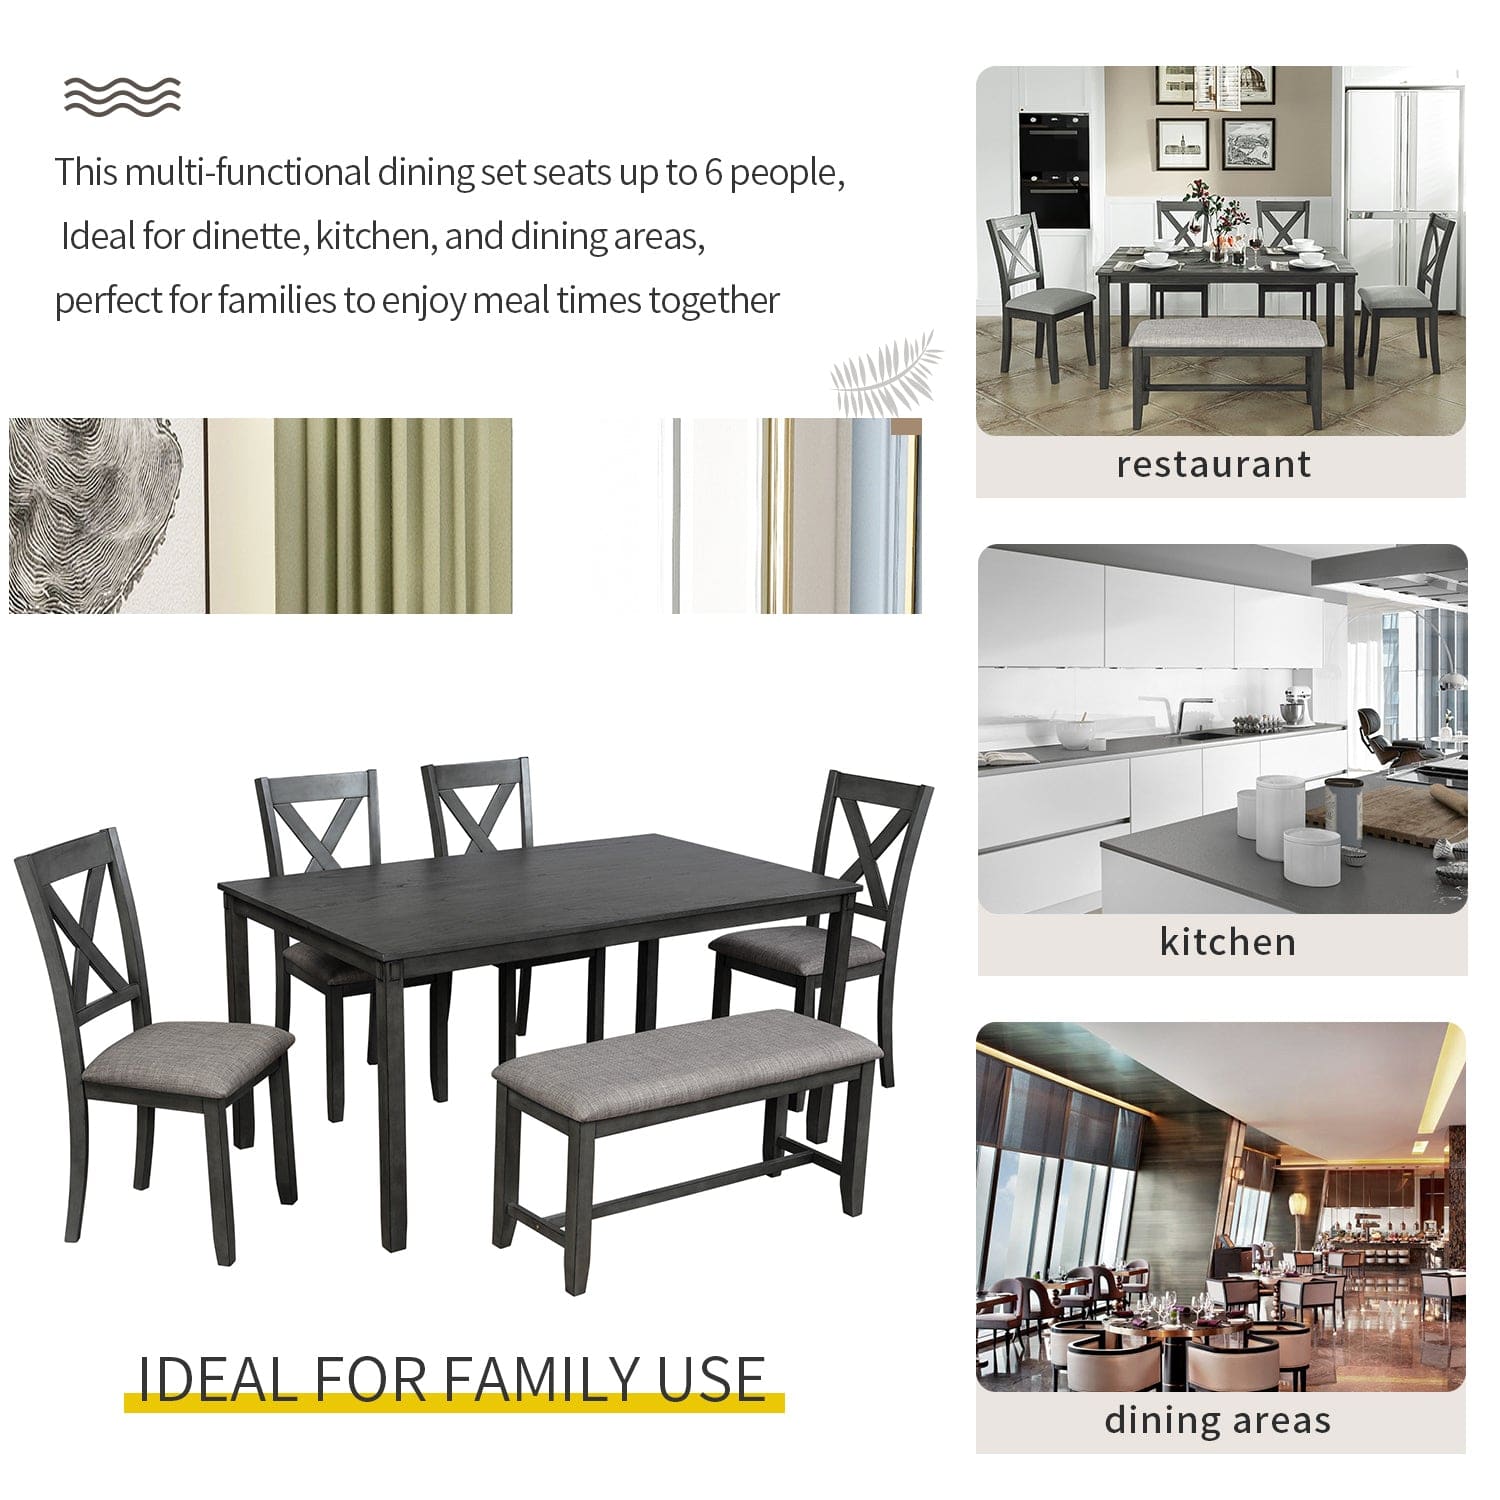 1st Choice Furniture Direct Dining Room Sets 1st Choice Wooden 6-Piece Dining Table Set with Chairs & Bench (Grey)